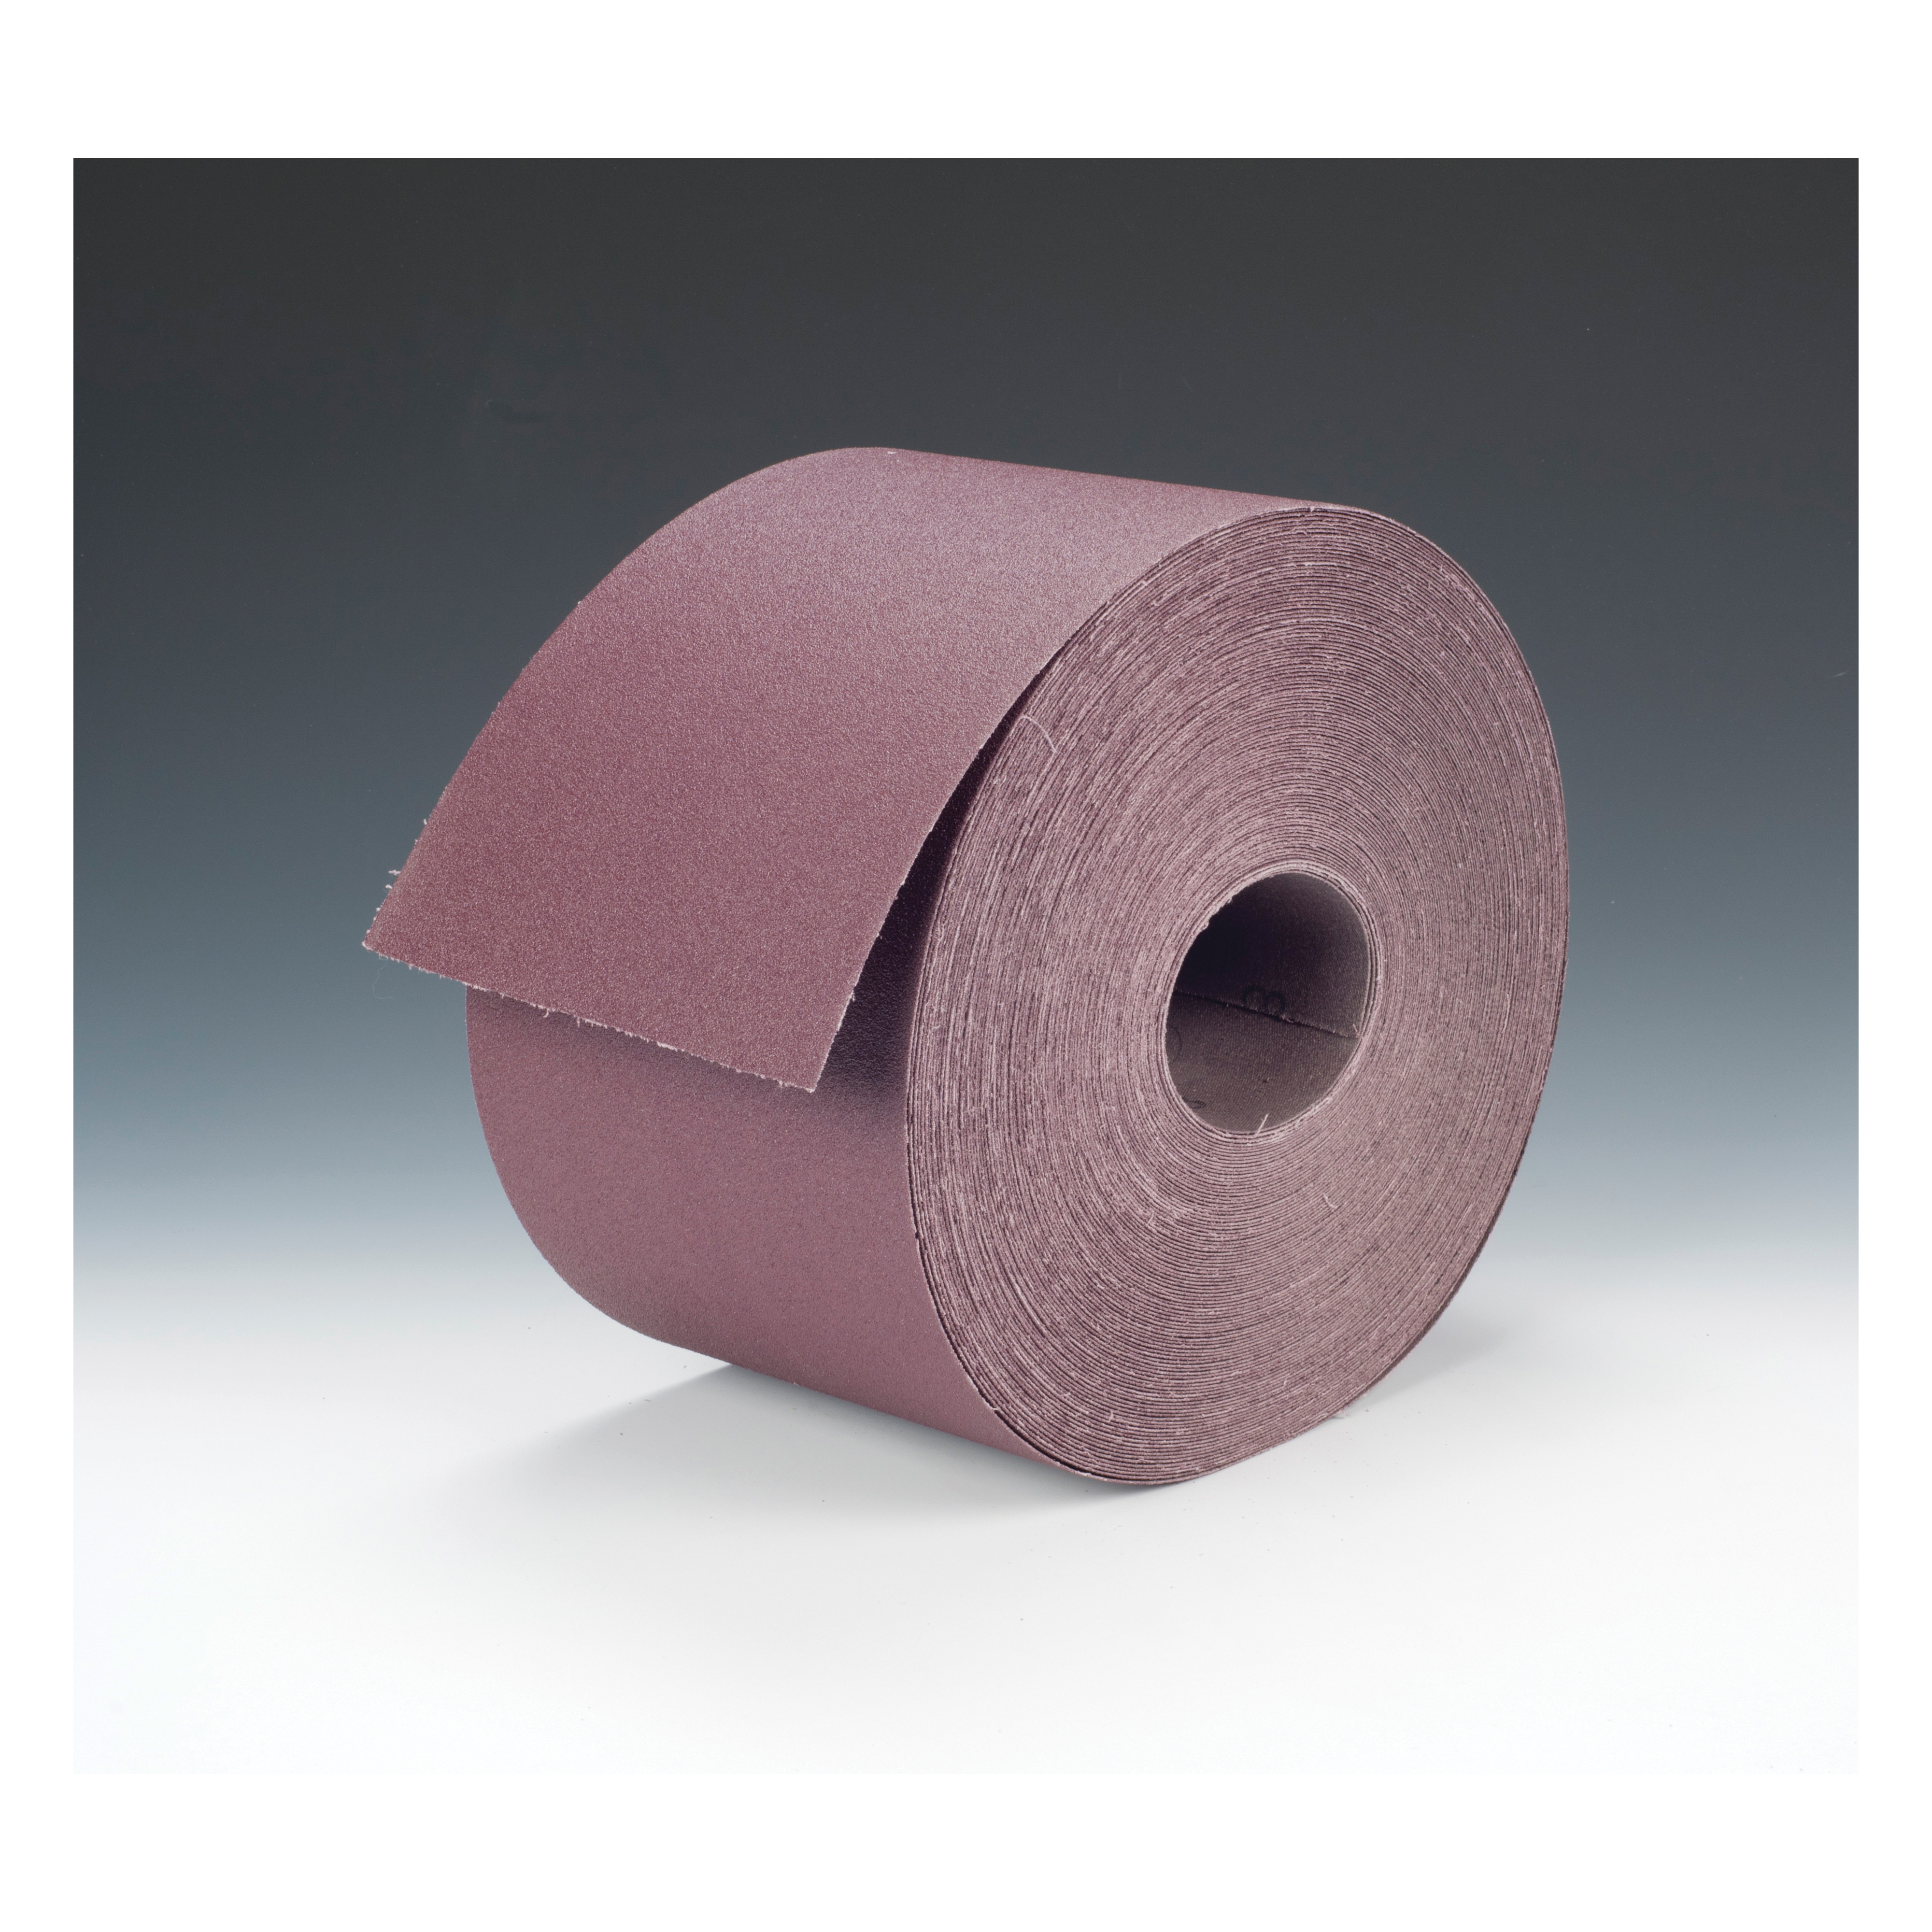 3M™ 051144-15157 Closed Coated Abrasive Roll, 50 yd L x 6 in W, 80 Grit, Medium Grade, Aluminum Oxide Abrasive, Cloth Backing